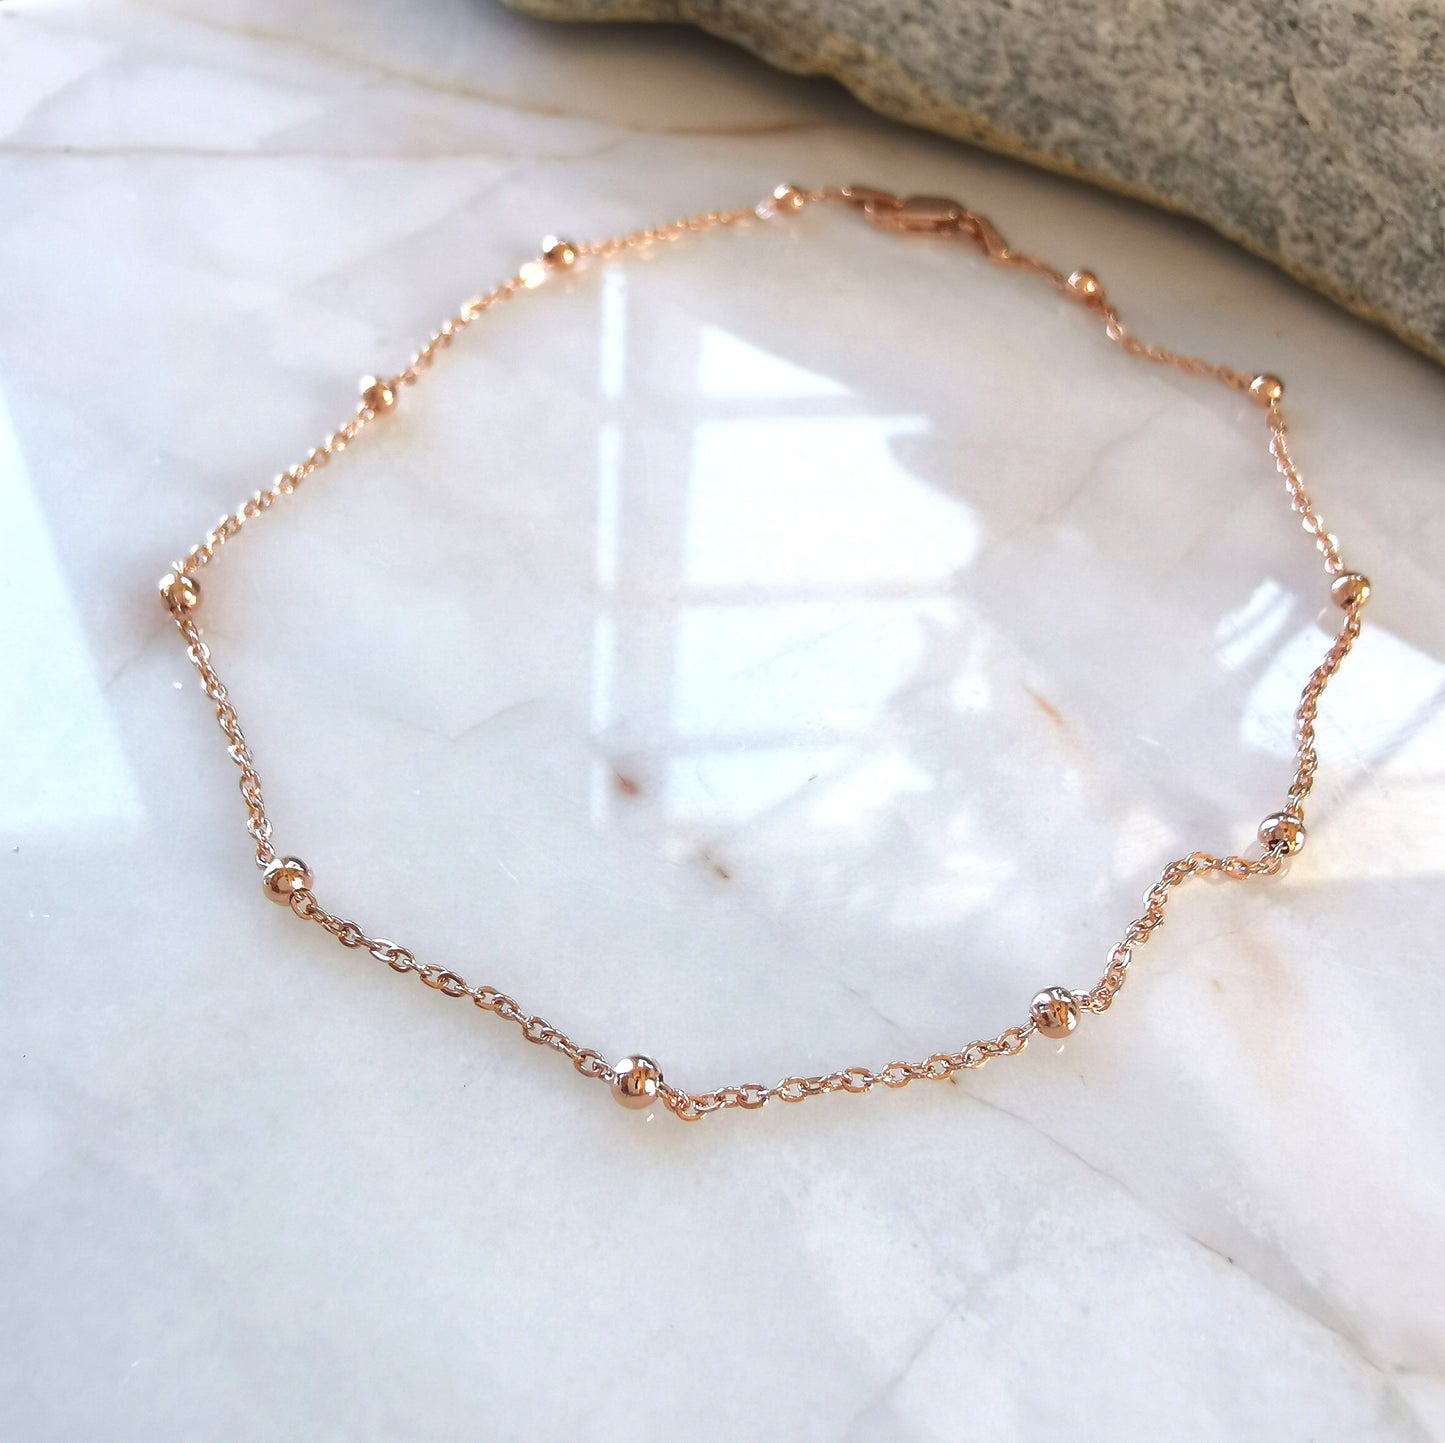 Delicate 9ct Gold Beaded Chain